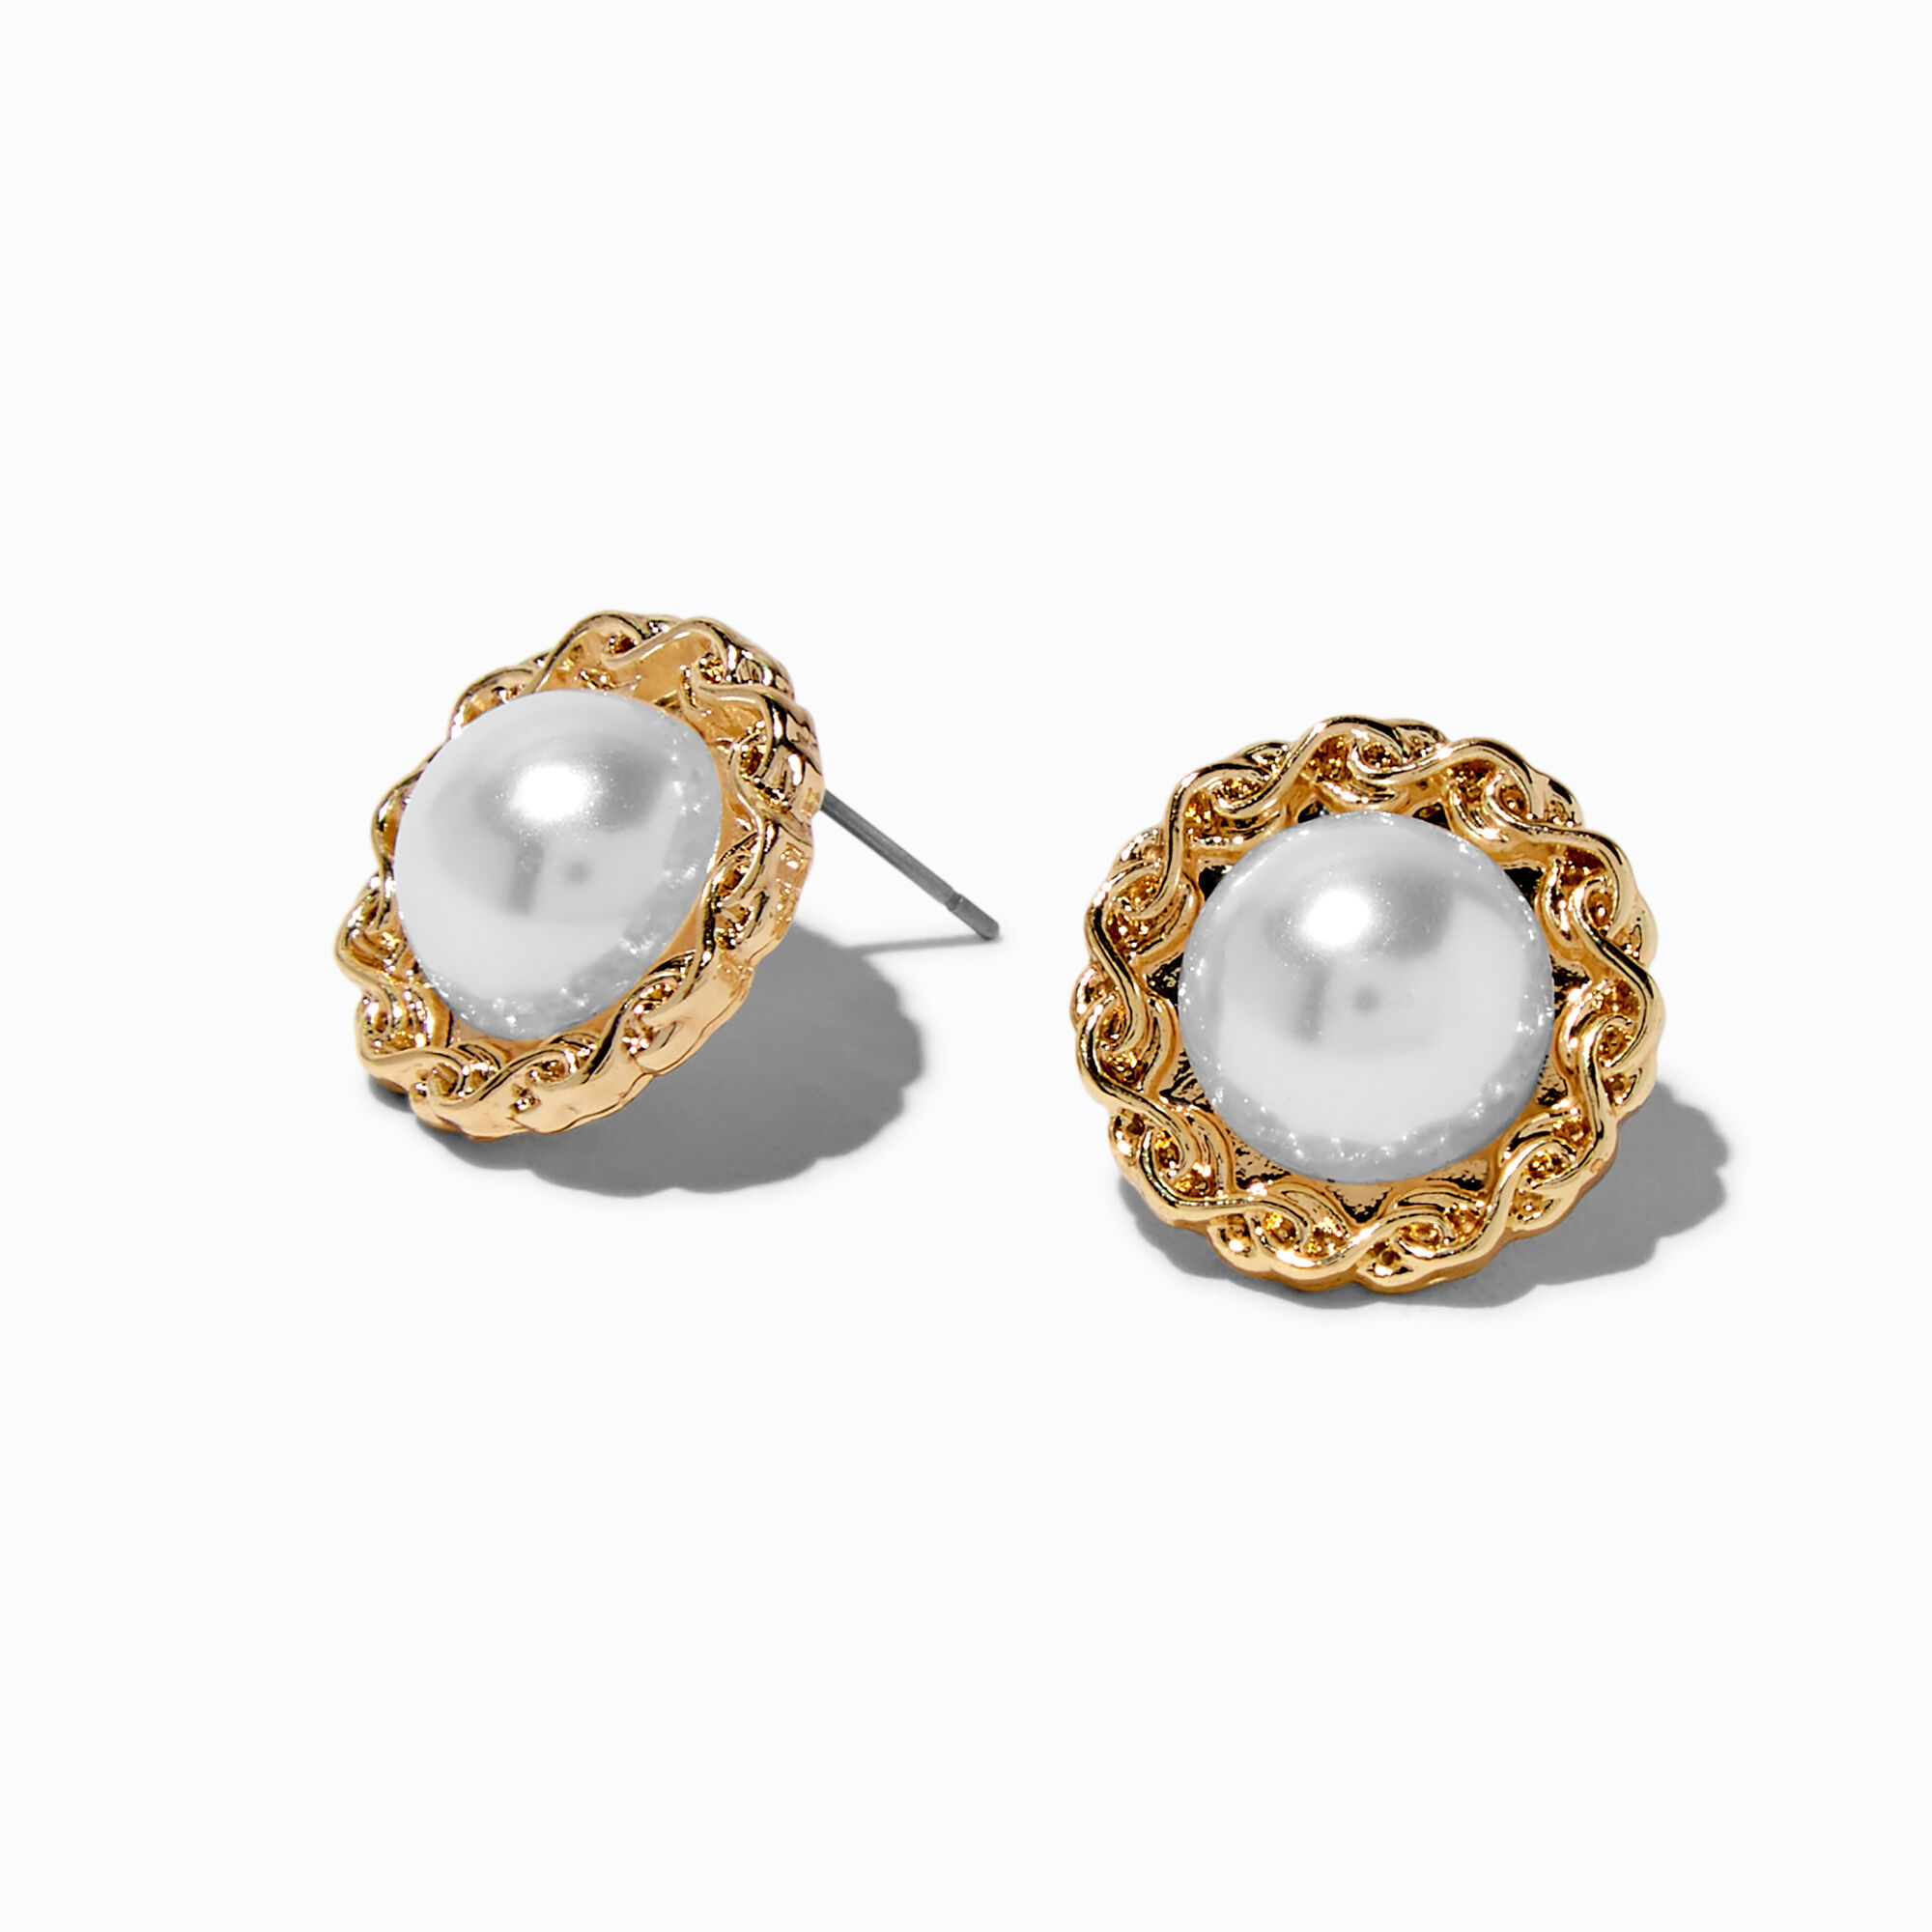 View Claires Tone Wreath Pearl Stud Earrings Gold information